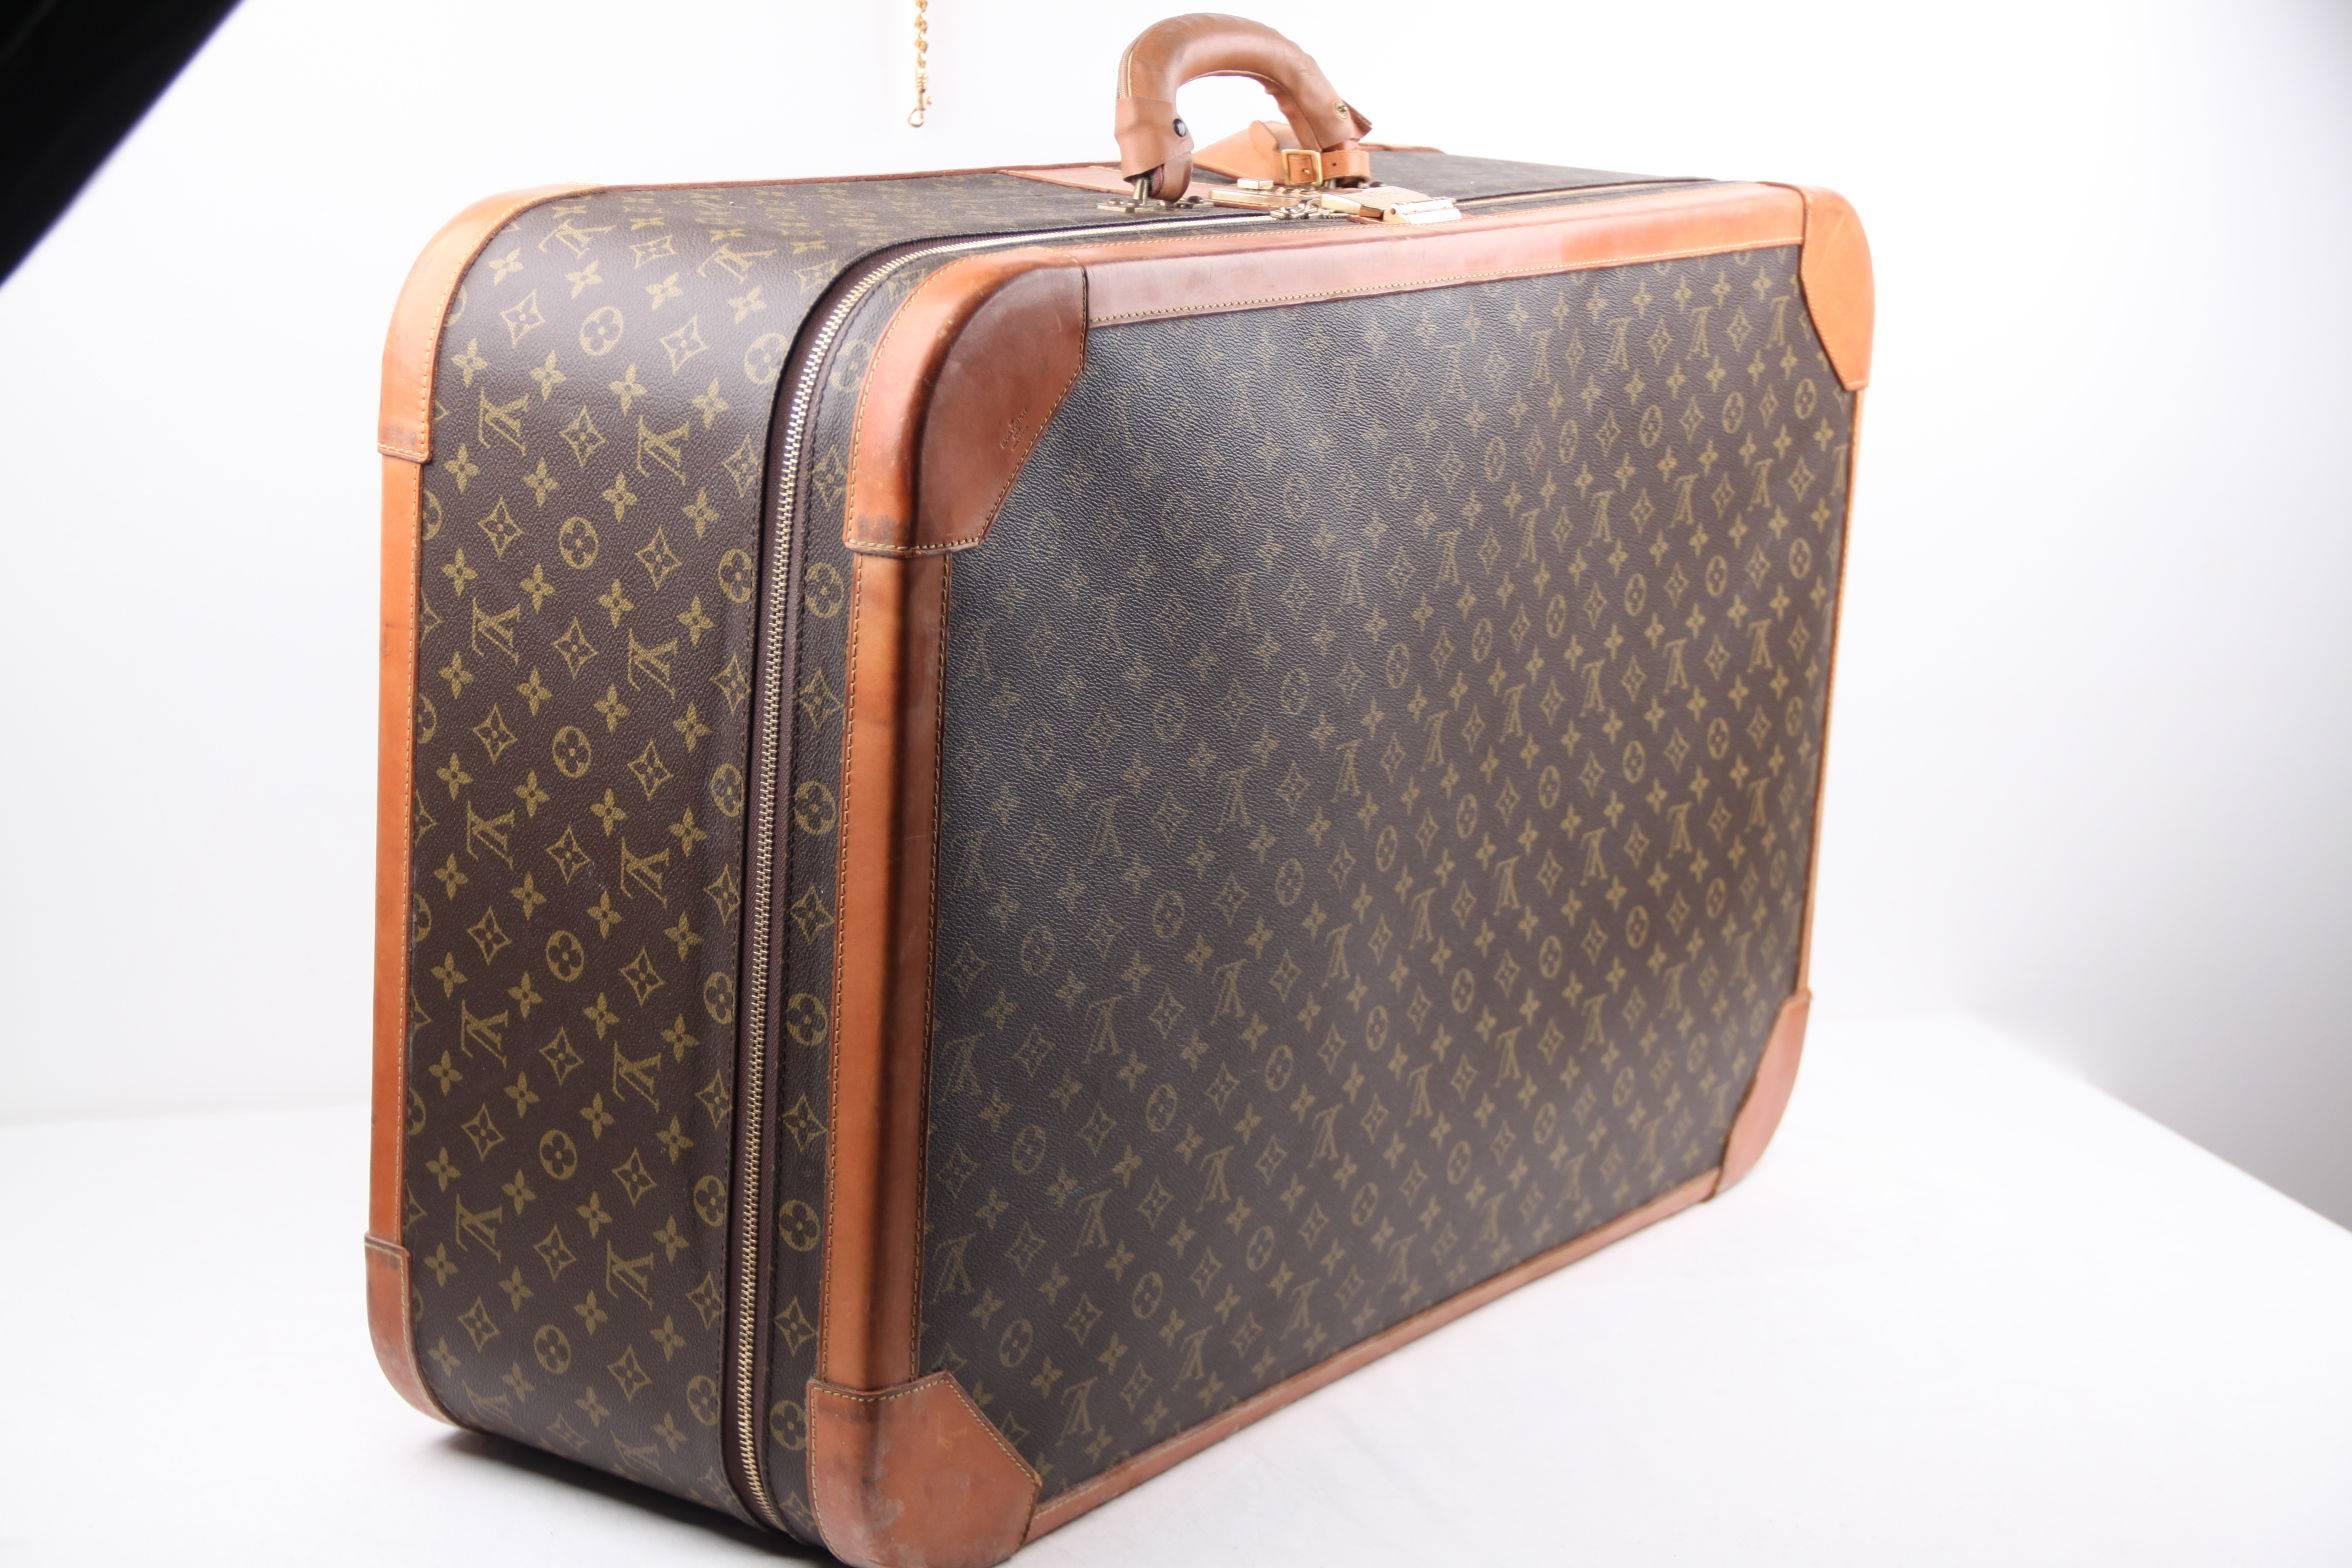 Brand: LOUIS VUITTON PARIS - made in France

Logos / Tags: LV - LOUIS VUITTON Monogram canvas, LOUIS VUITTON signature on interior straps, 'LOUIS VUITTON - Made in France' engraved on upper leather corners

Condition rate (please read our